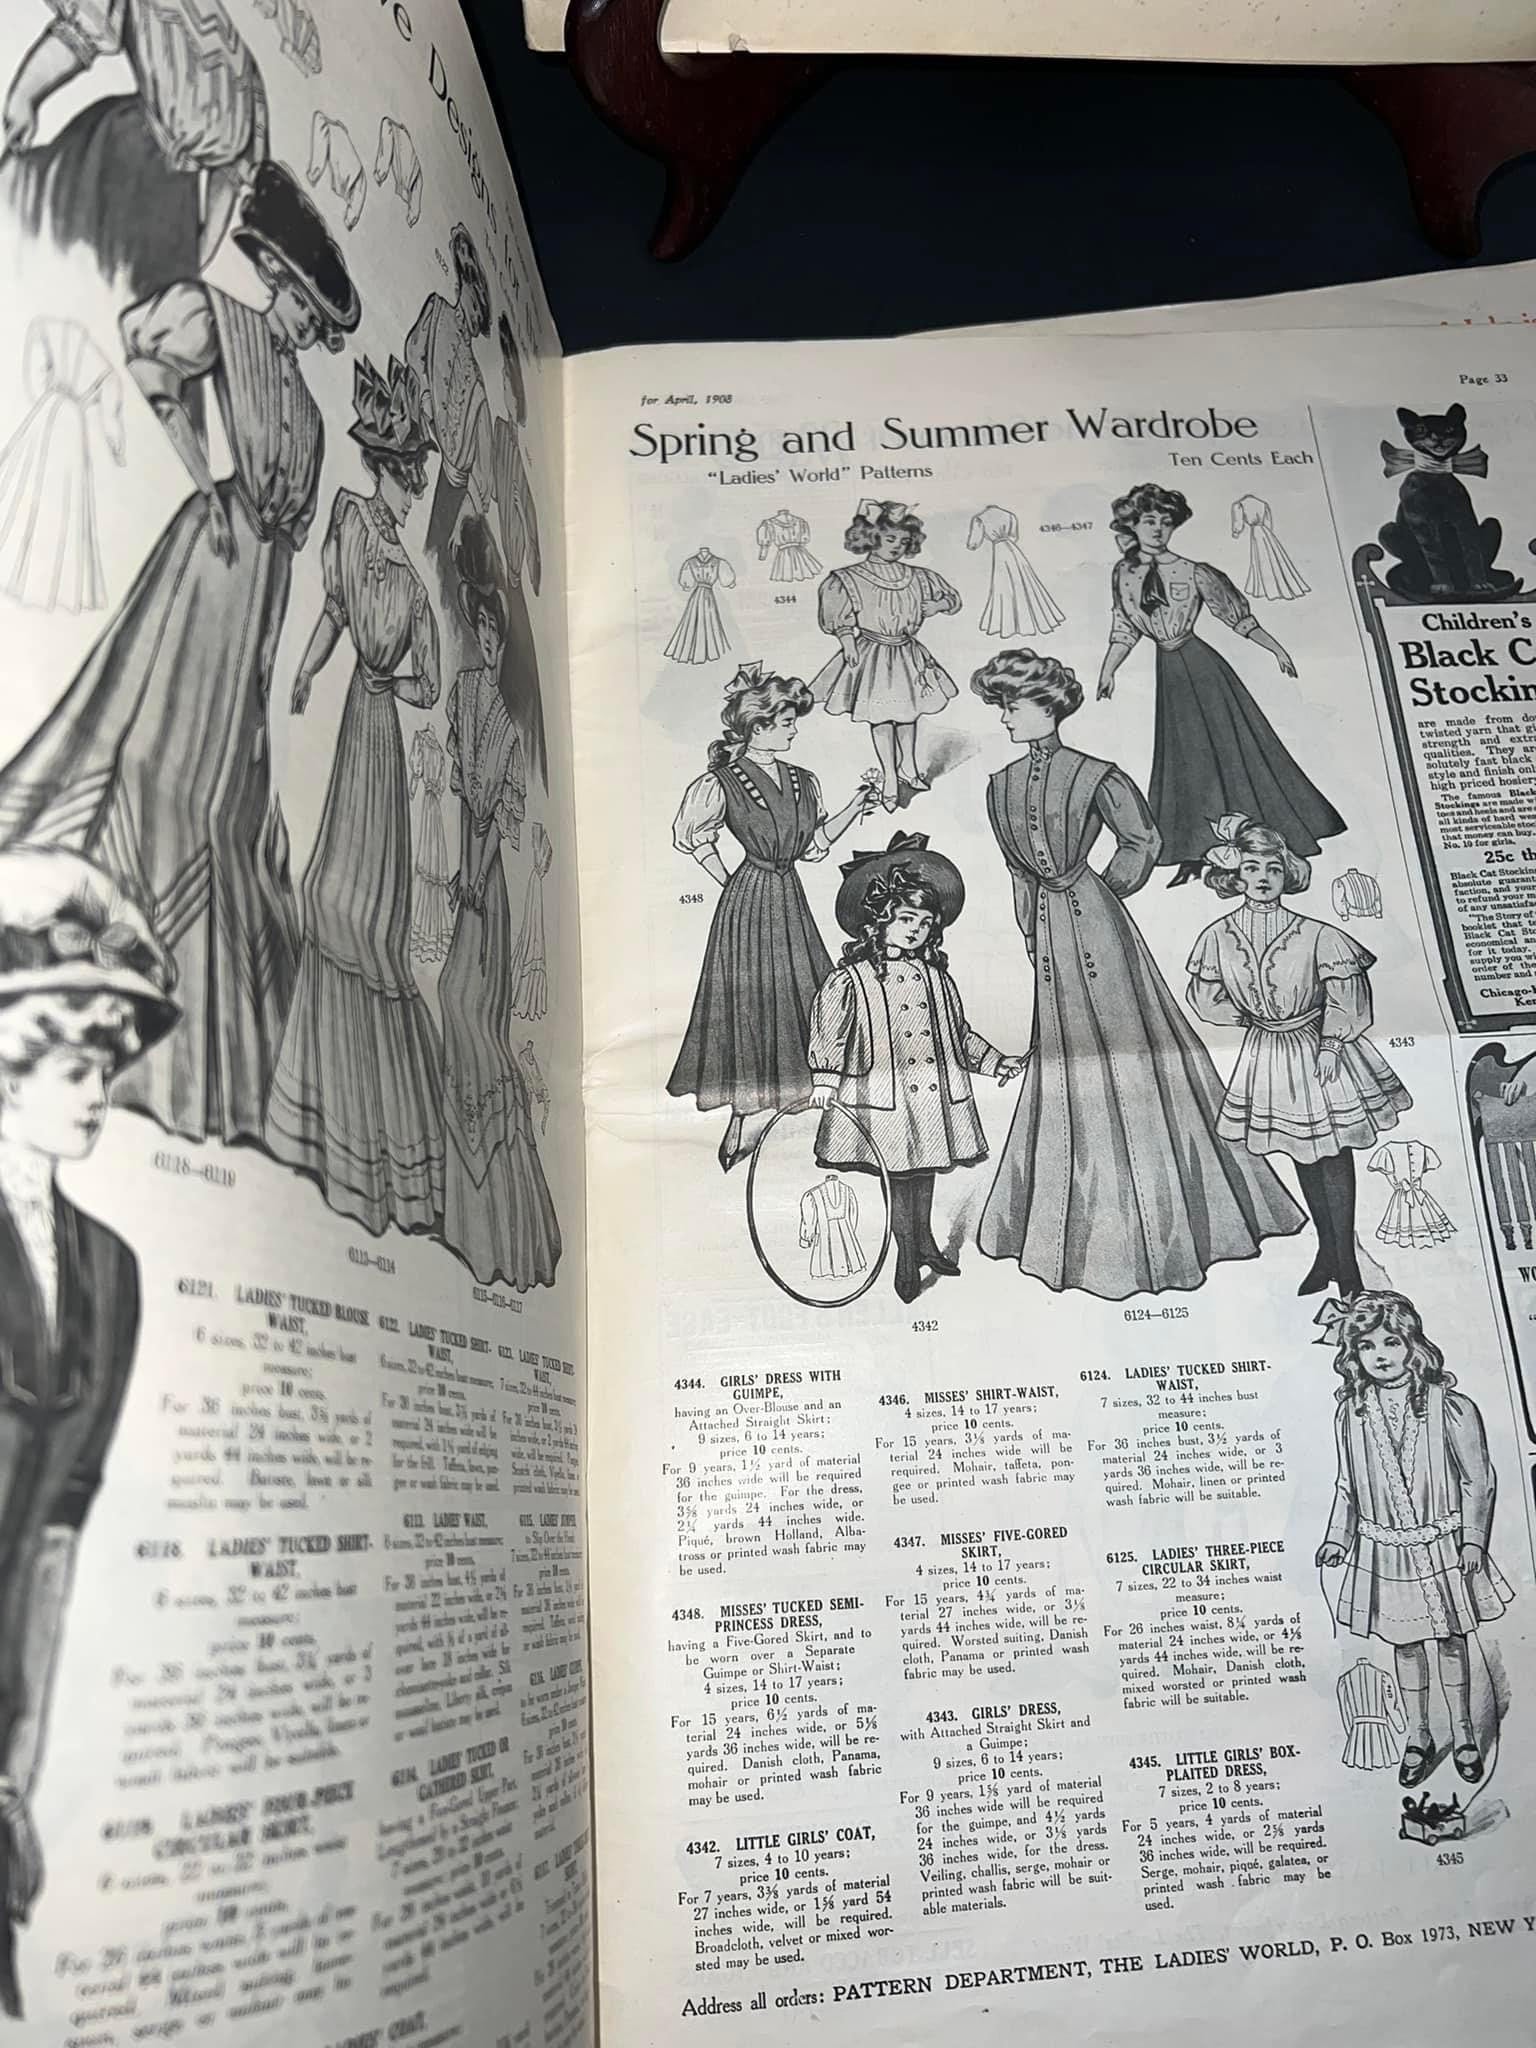 Antique The ladies world 3 magazines April , July , December- 1908 Filled with early fashion advertising